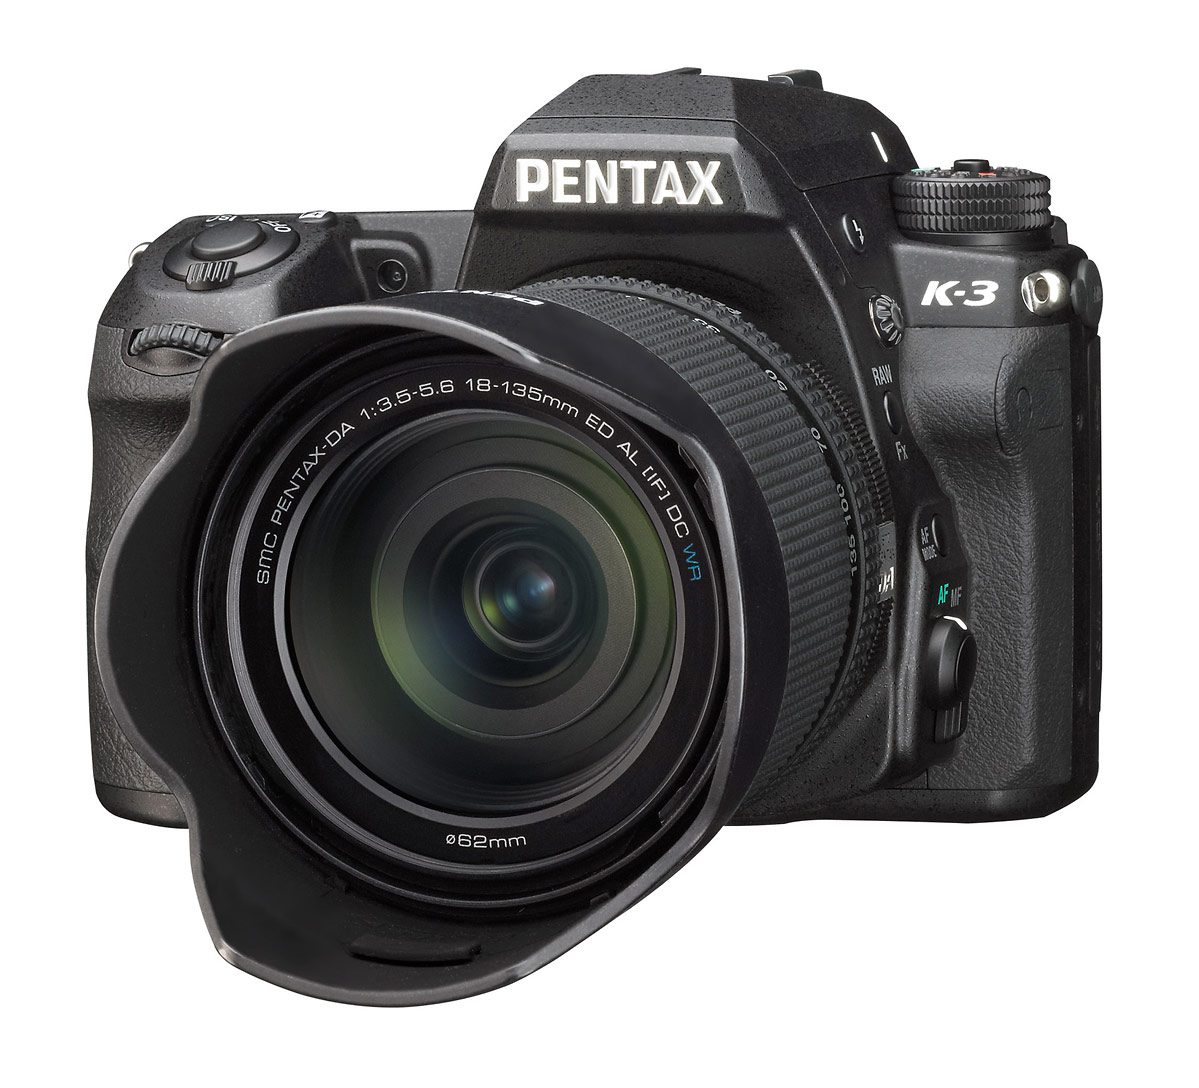 Pentax K-3 Firmware 1.30 and K-50 Firmware 1.10 Released